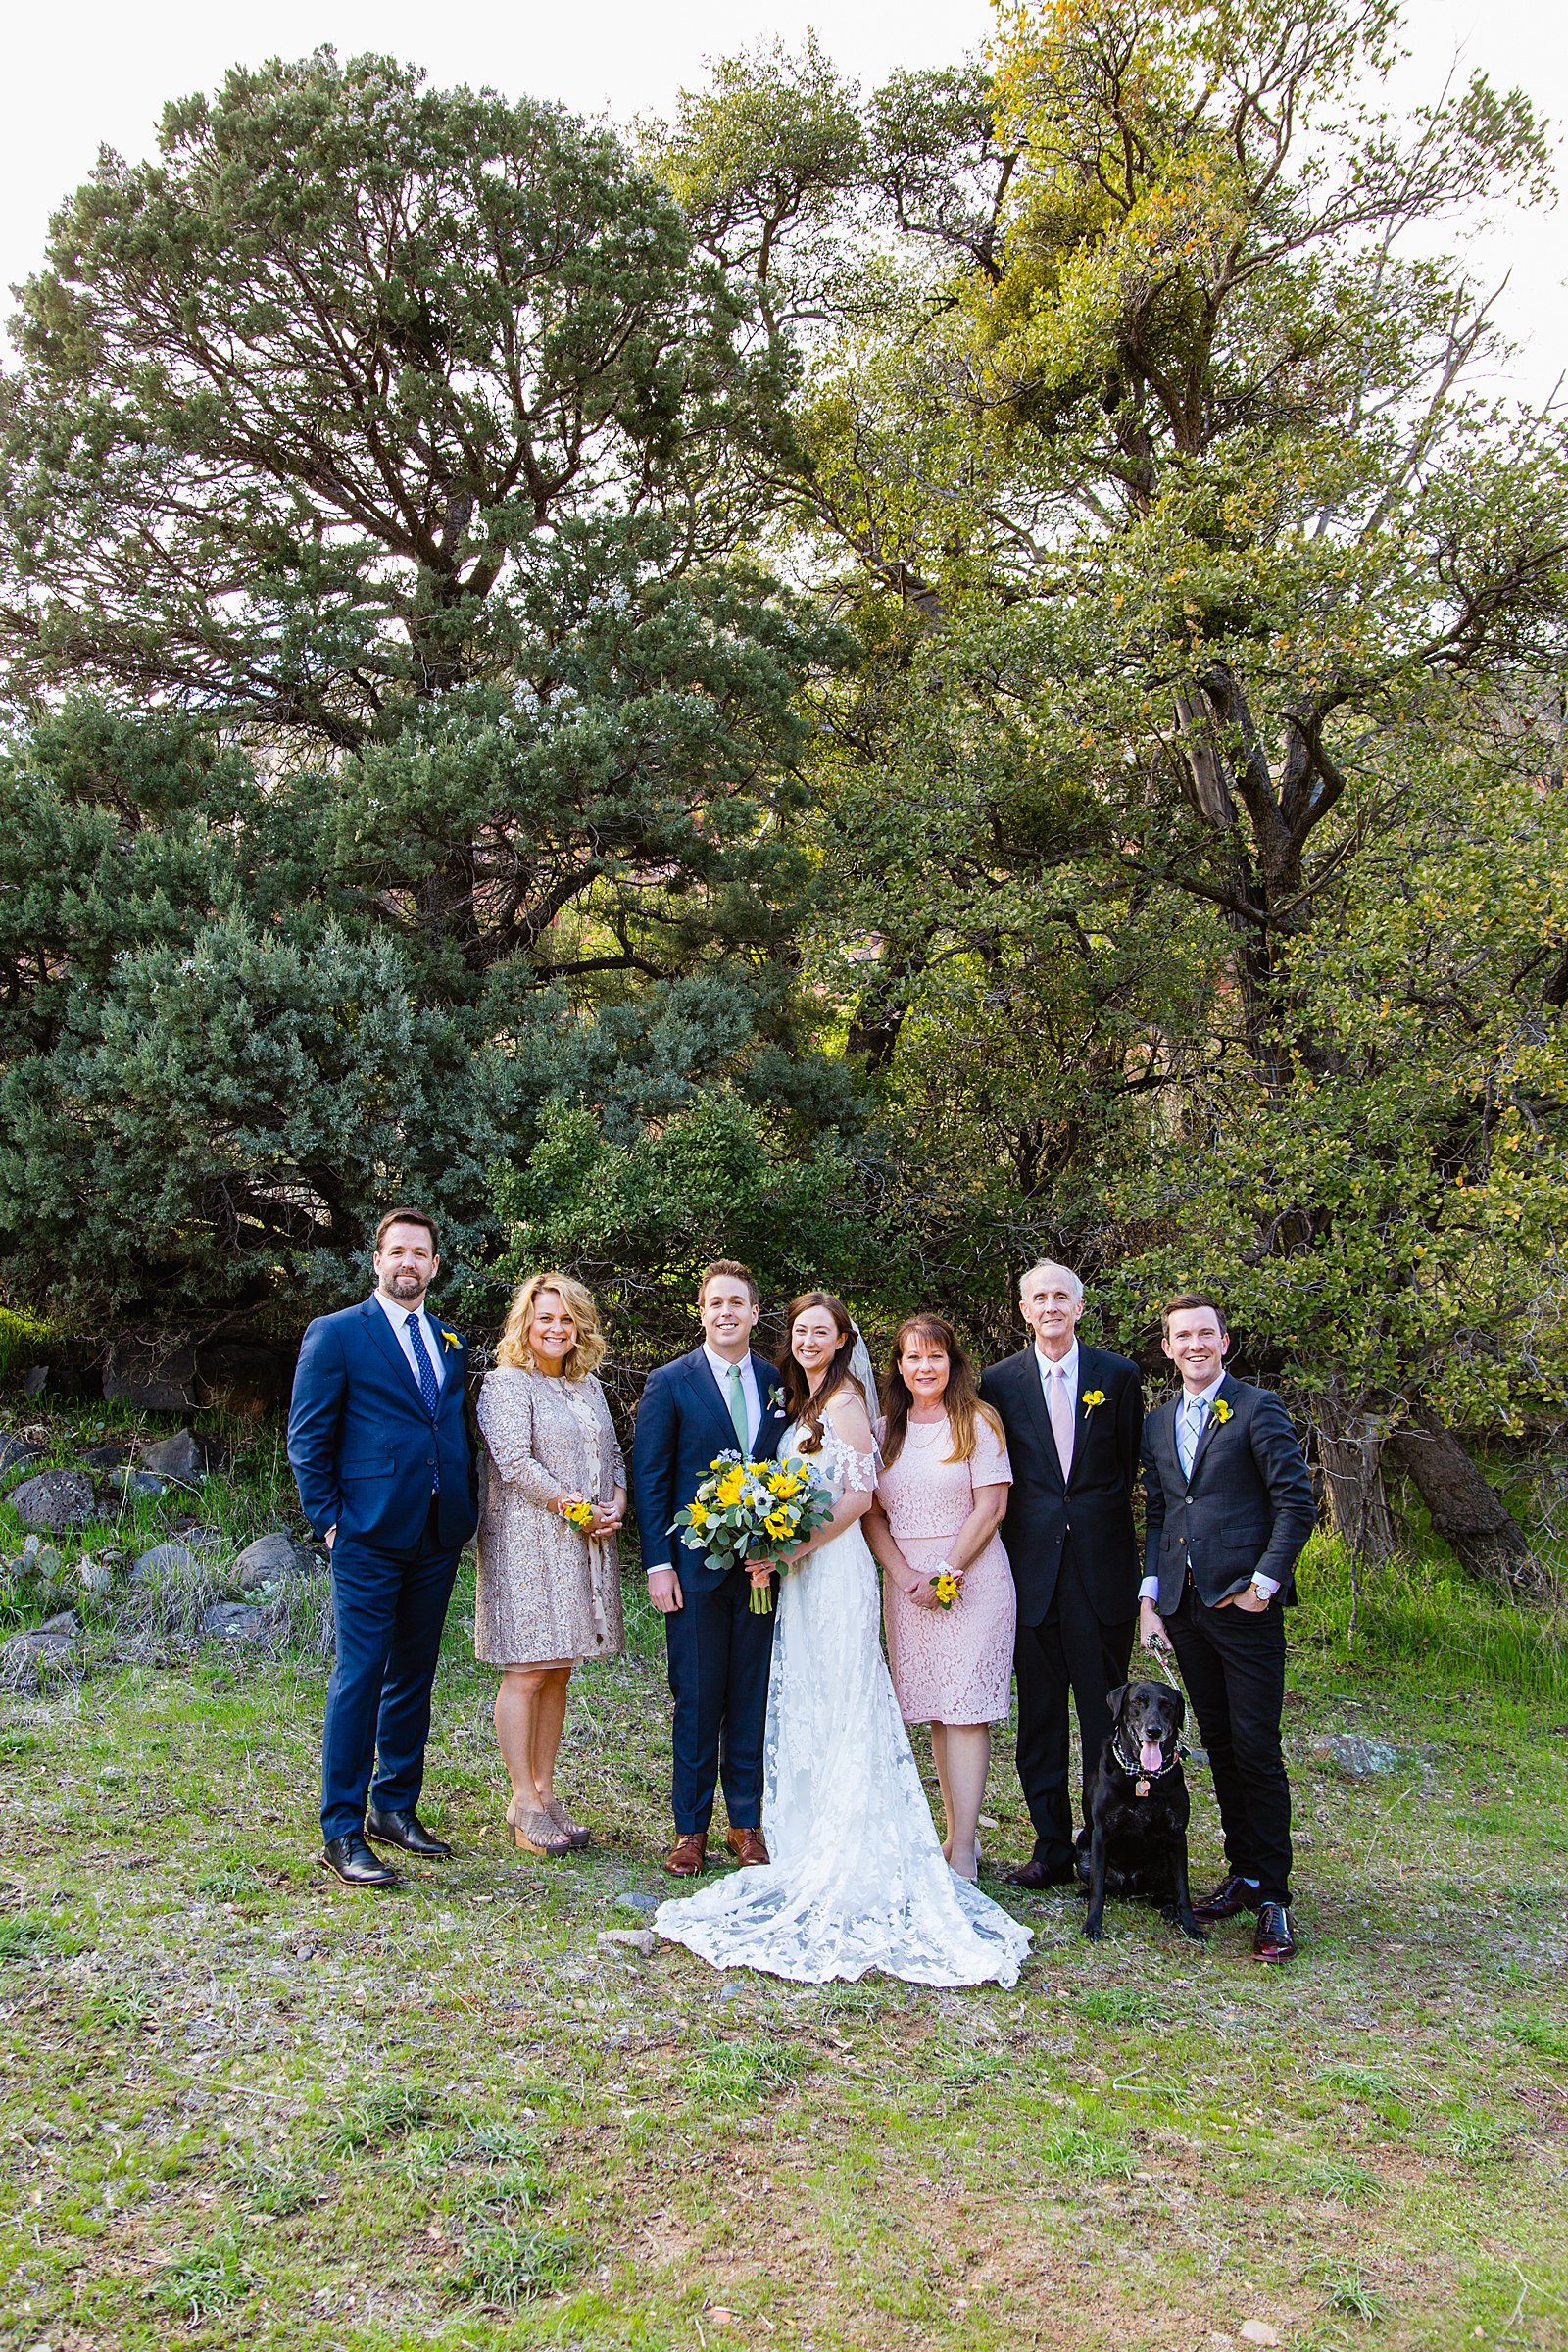 Bride and groom take photos with their family by Sedona elopement photographer PMA Photography.